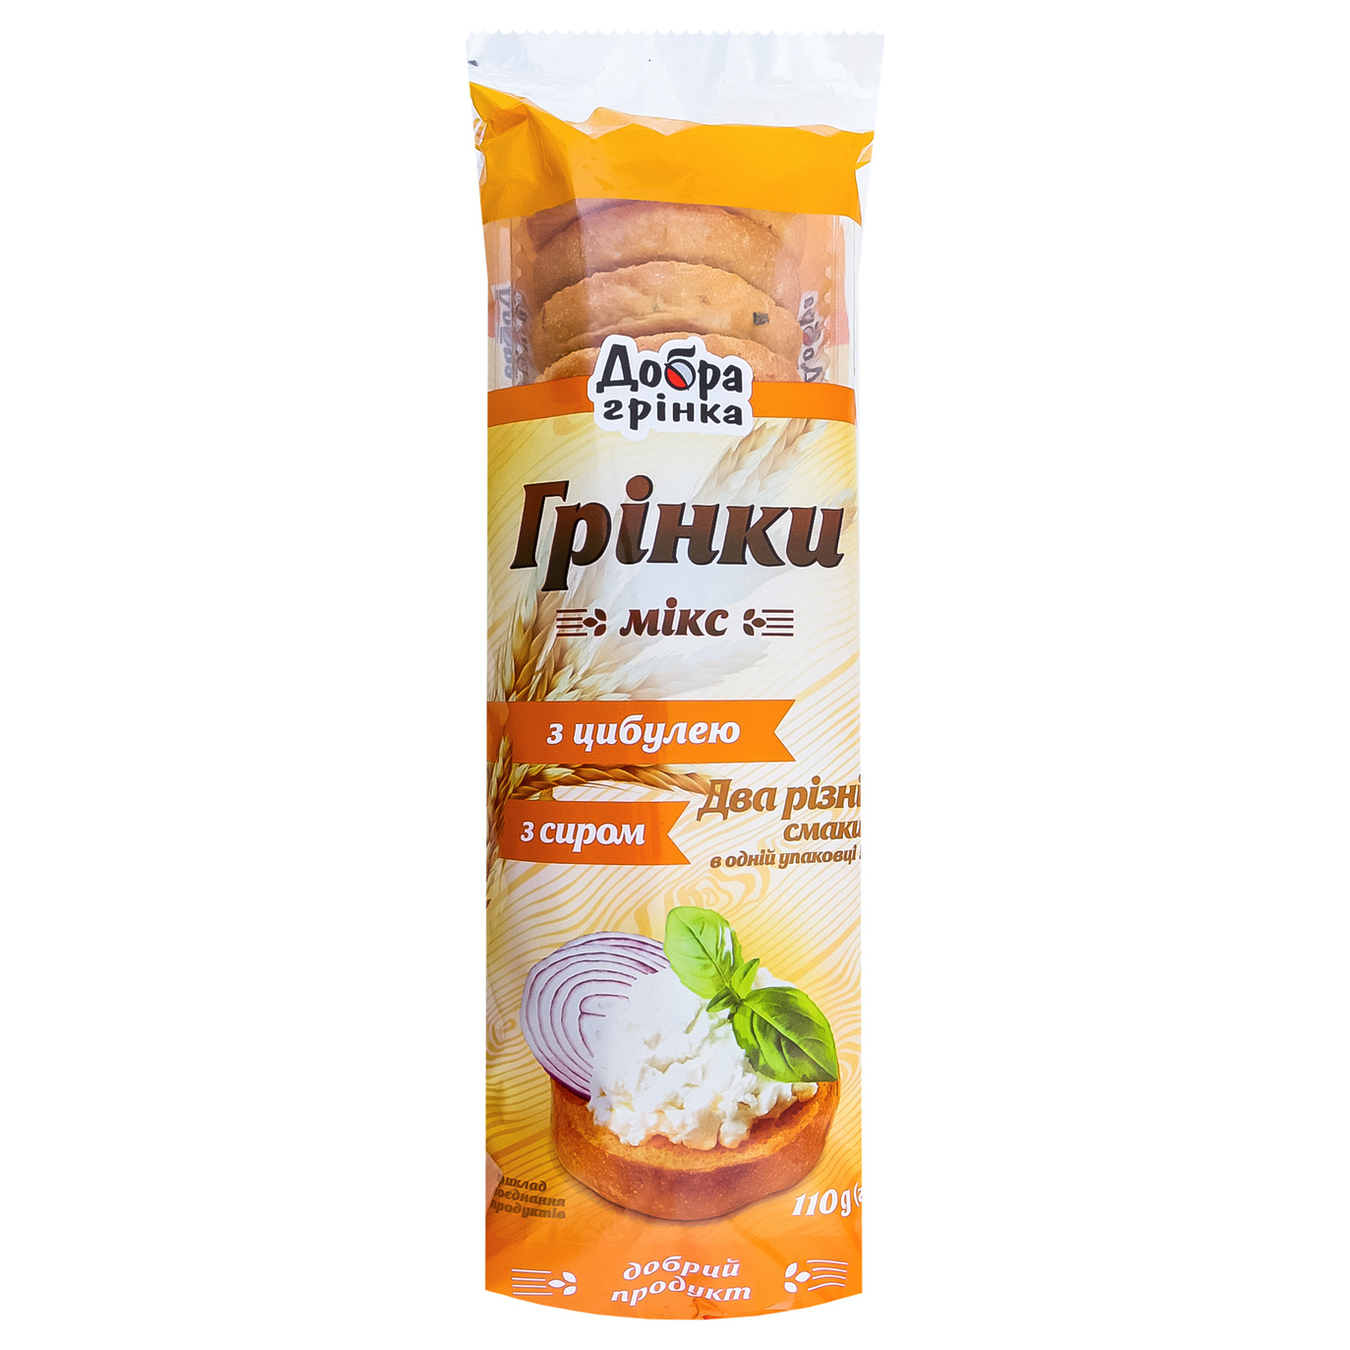 Dobra grinka Toasts Mix with onions and cheese 110g